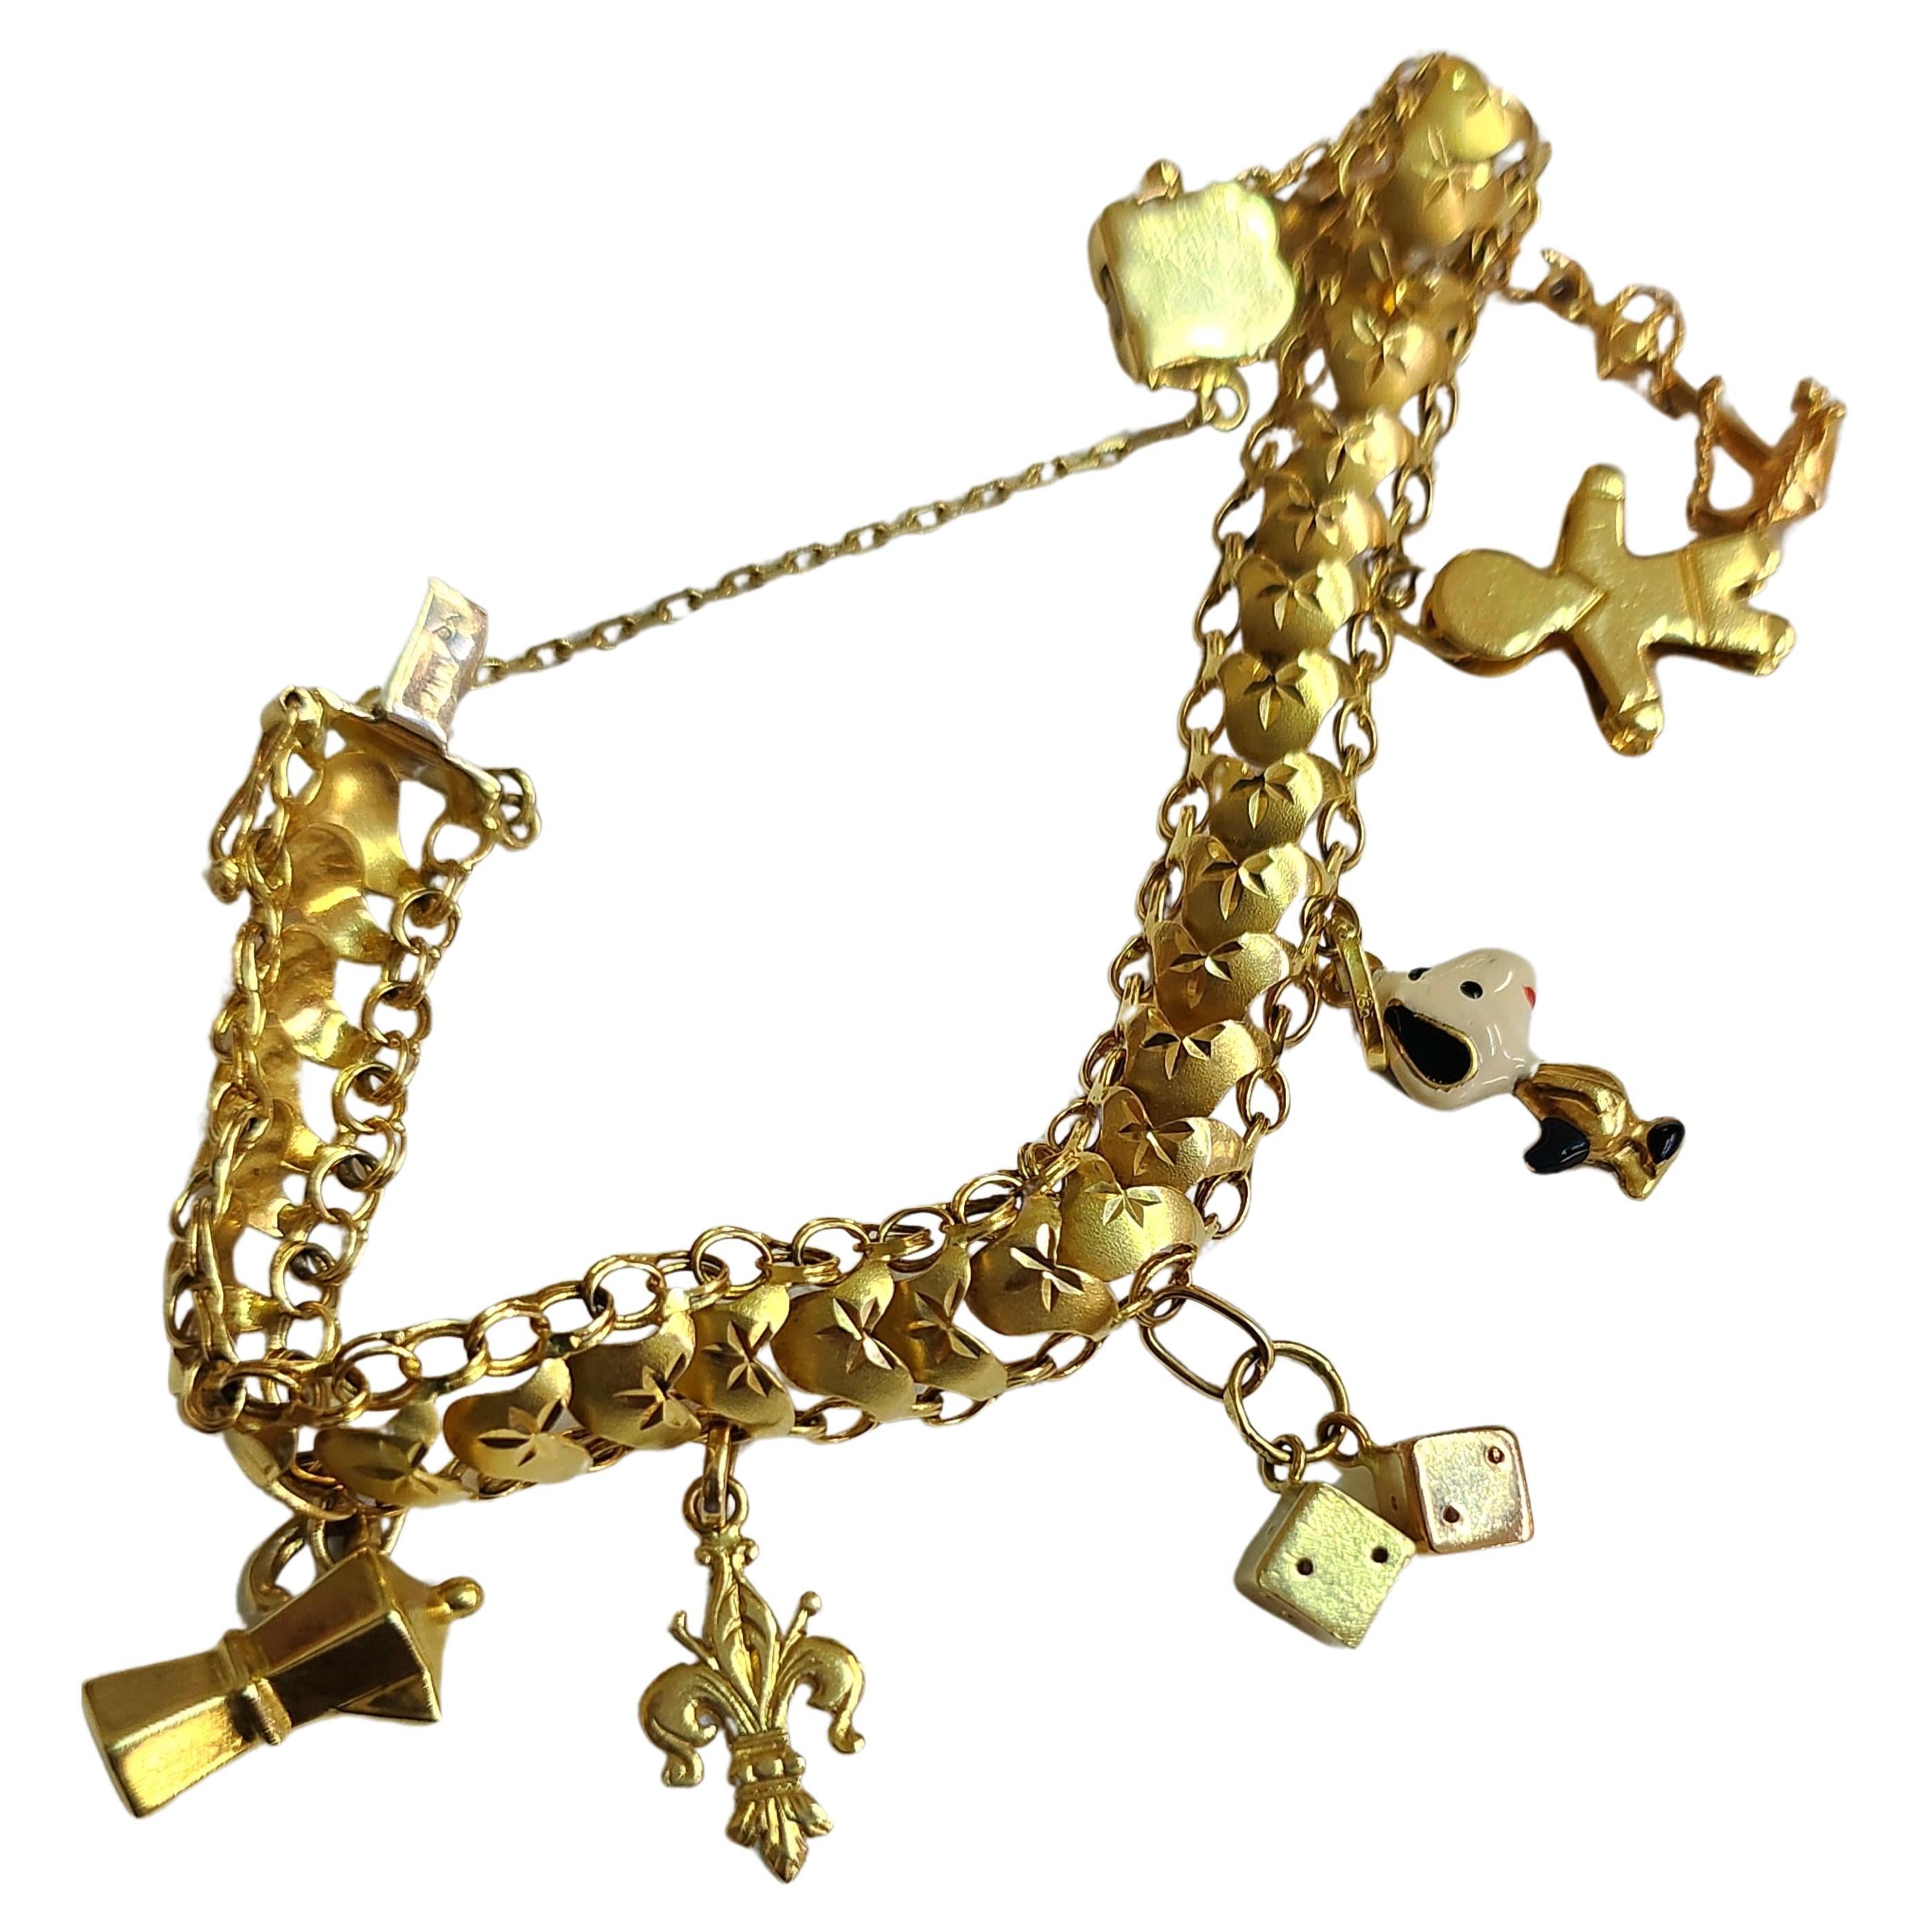 Vintage 1970s 18k gold bracelet with 6 dangling charms in very good condition hall marked and gold tested